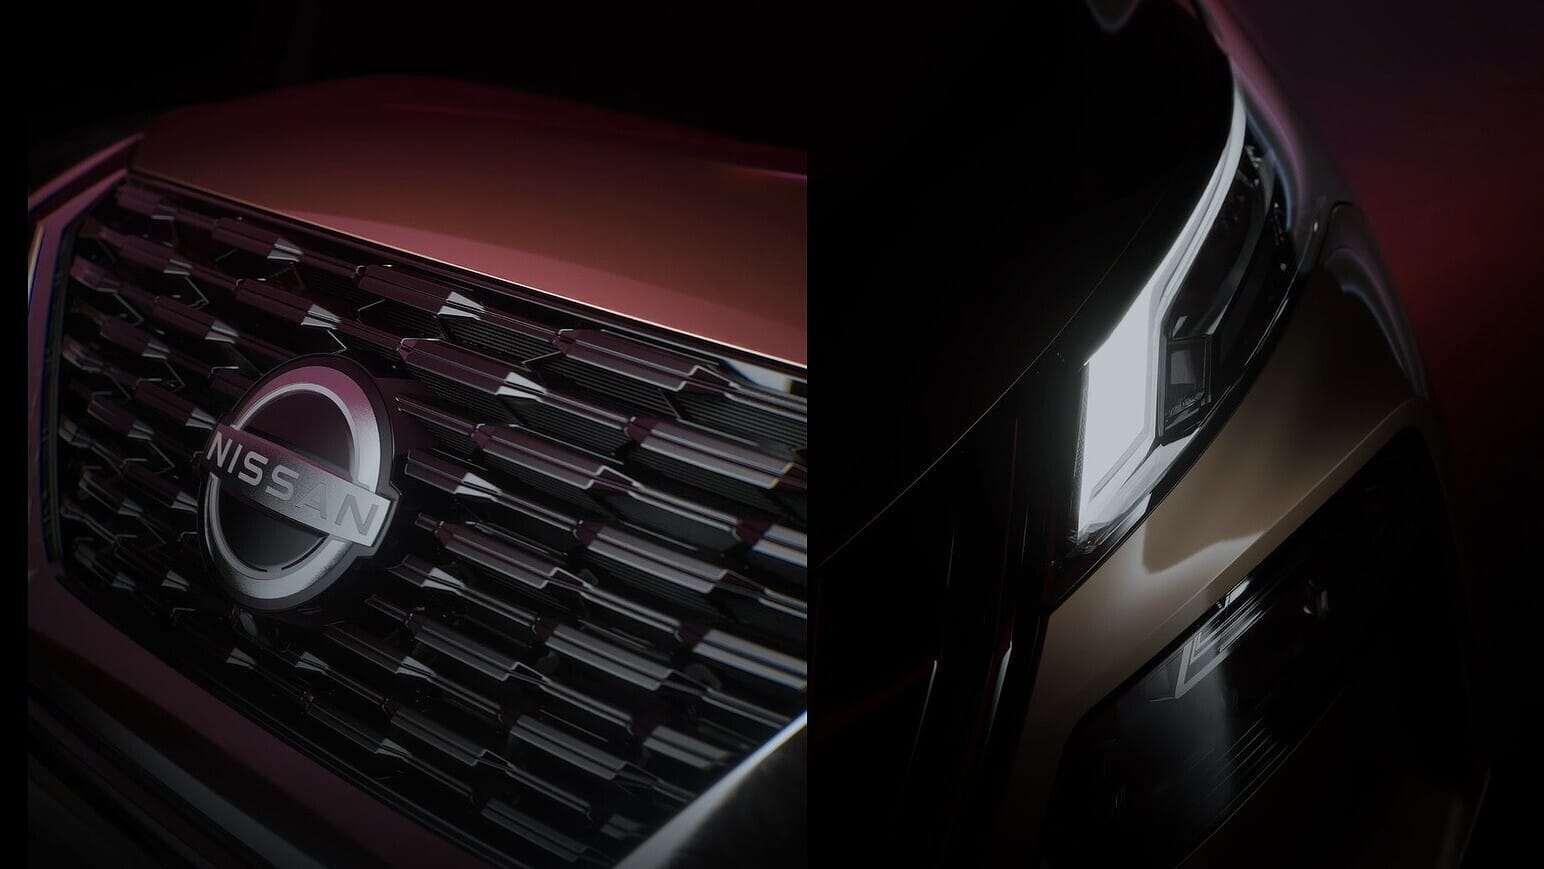 Nissan X-Trail teased: What to expect from the India-bound SUV?